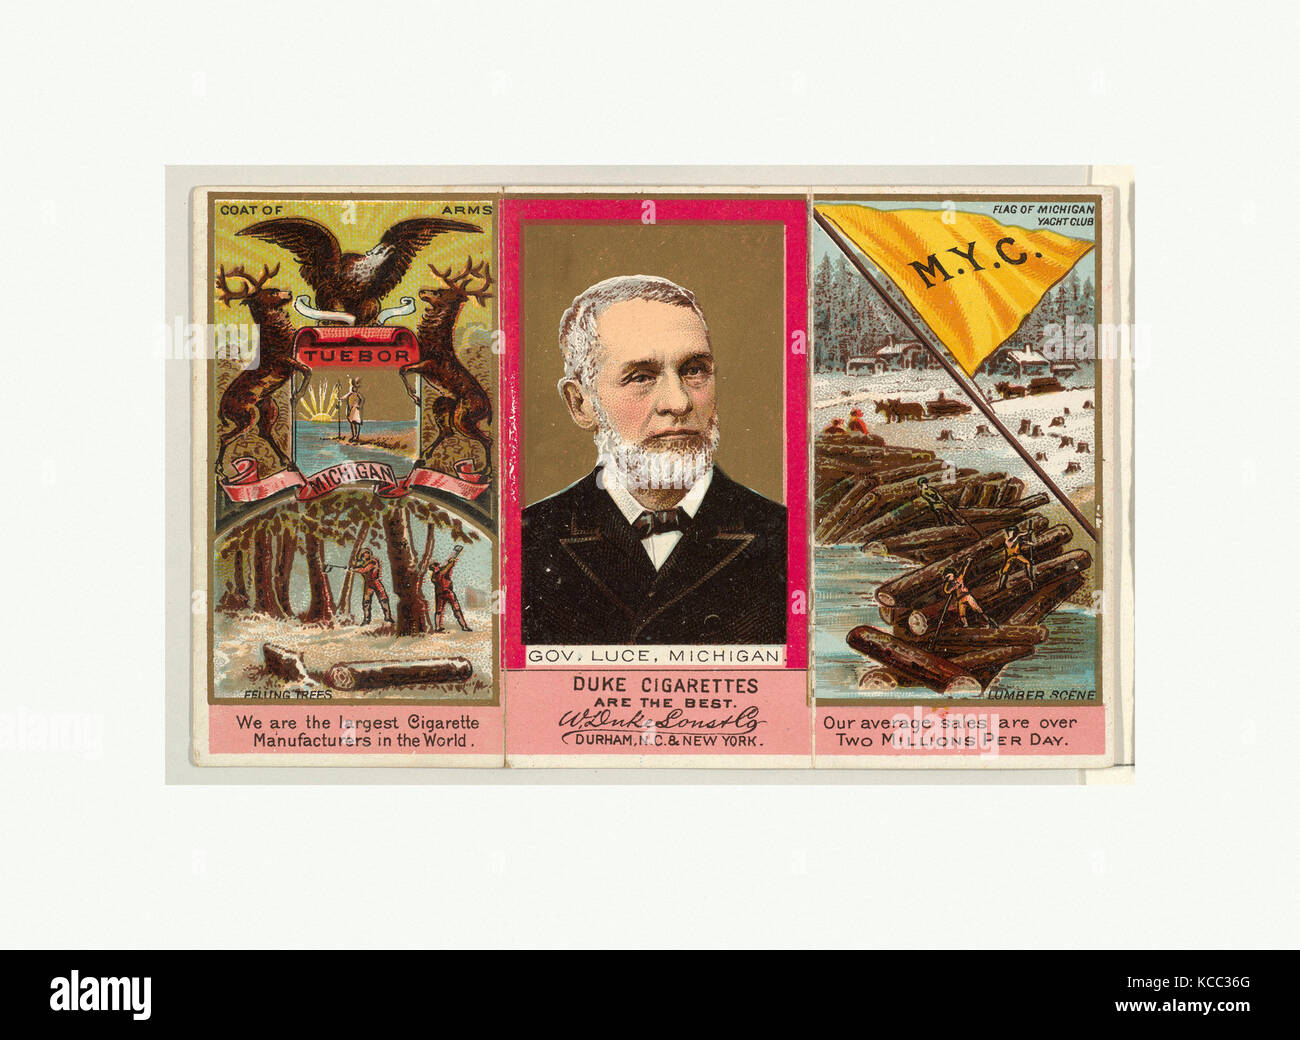 Governor Luce, Michigan, from 'Governors, Arms, Etc.' series (N133-2), issued by Duke Sons & Co., ca. 1888 Stock Photo